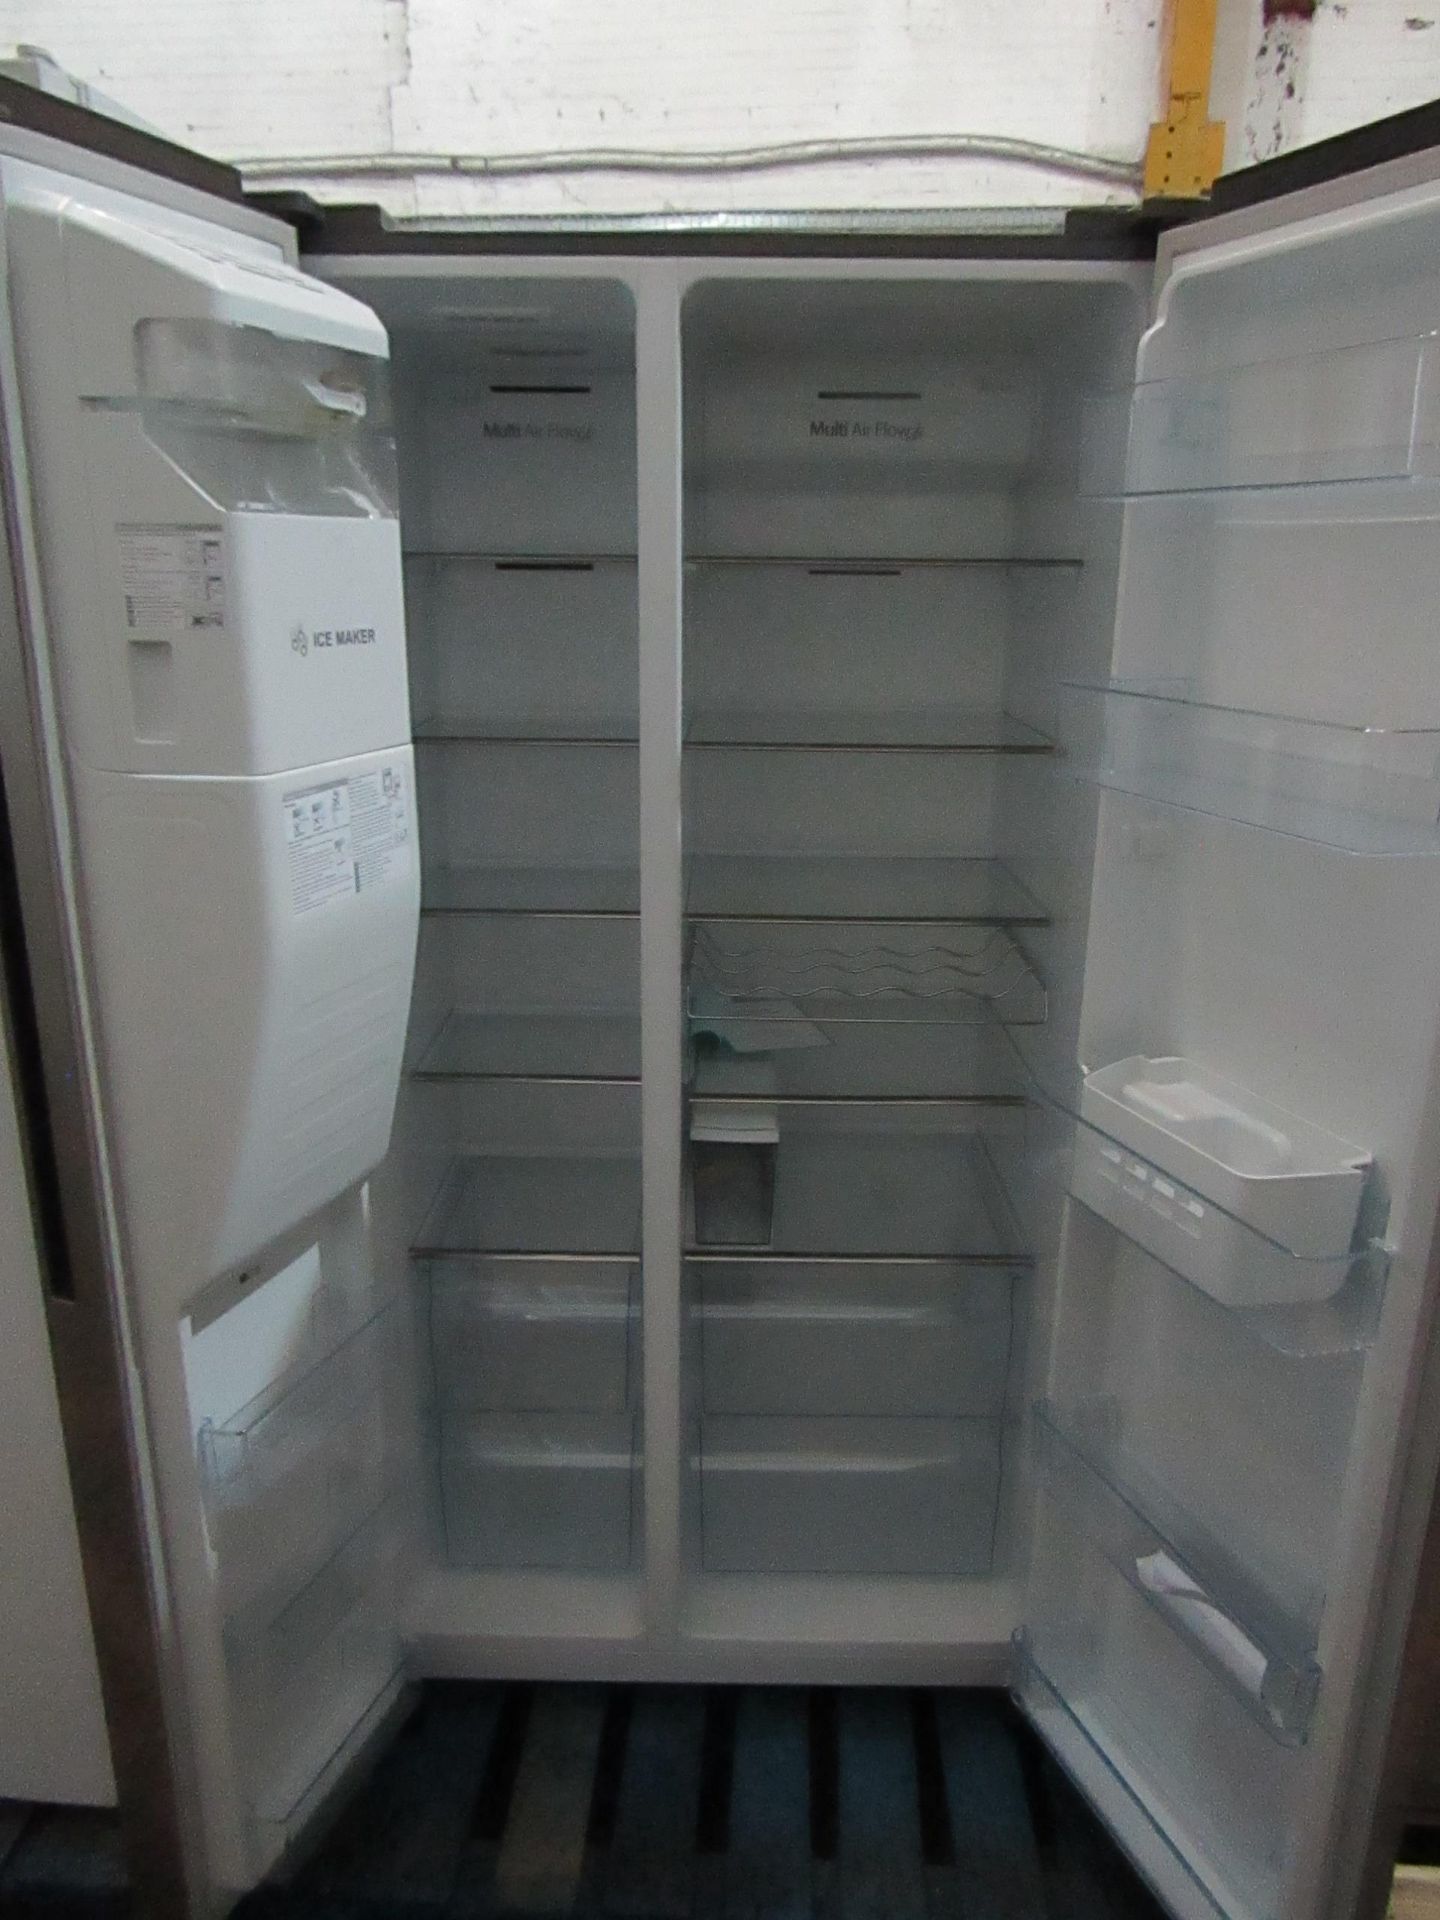 Hisense American style fridge freezer with water dispenser, tested working for cold ness, water - Image 2 of 3